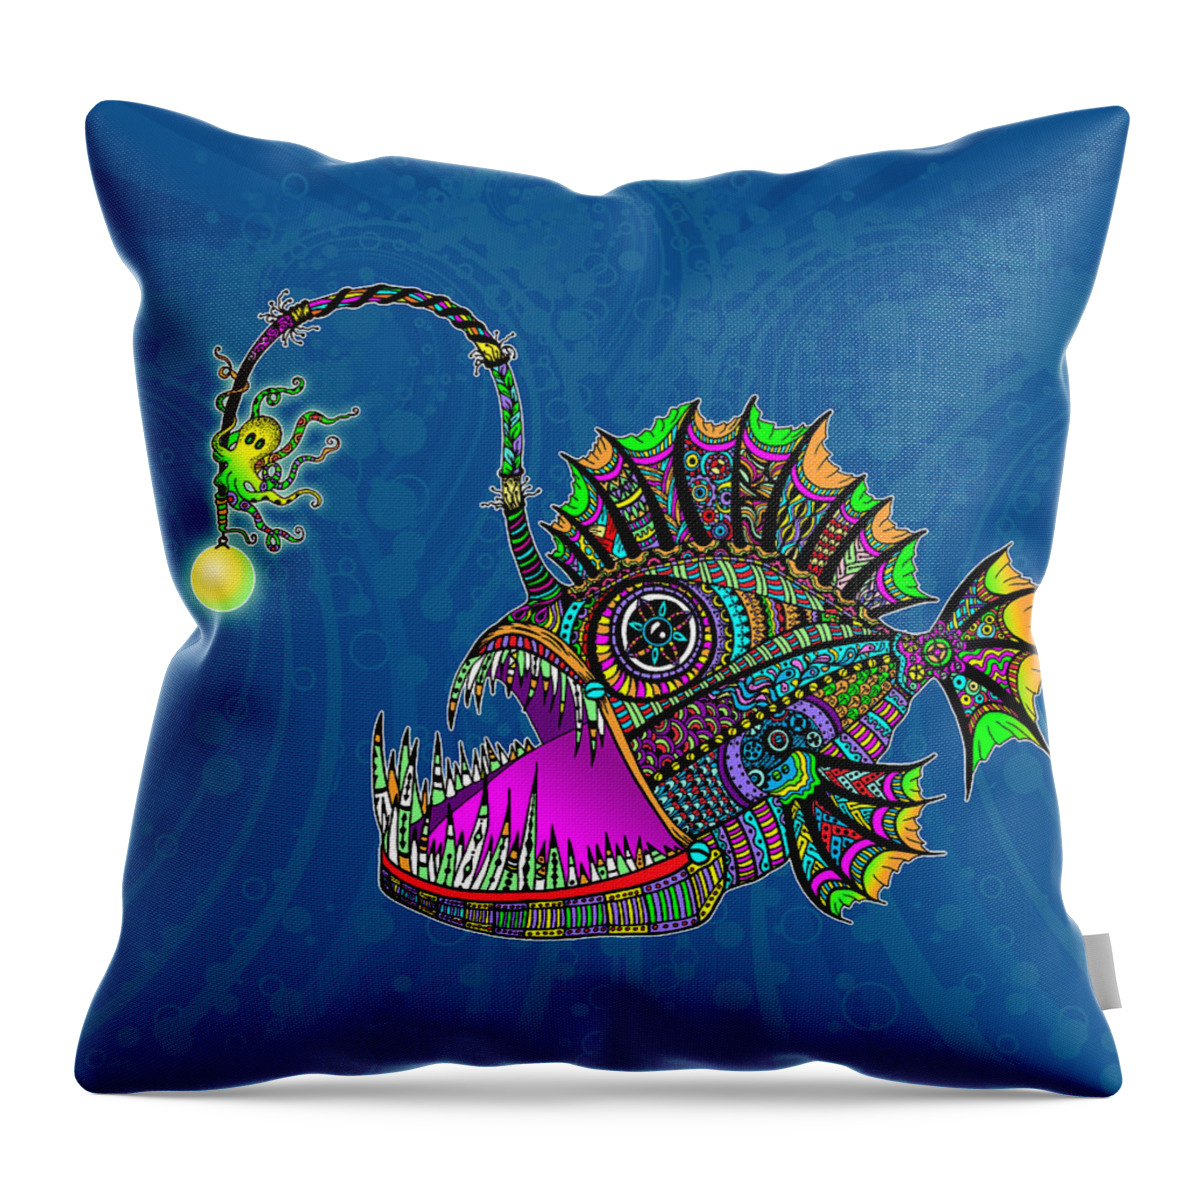 Angler Fish Throw Pillow featuring the digital art Electric Angler Fish by Tammy Wetzel